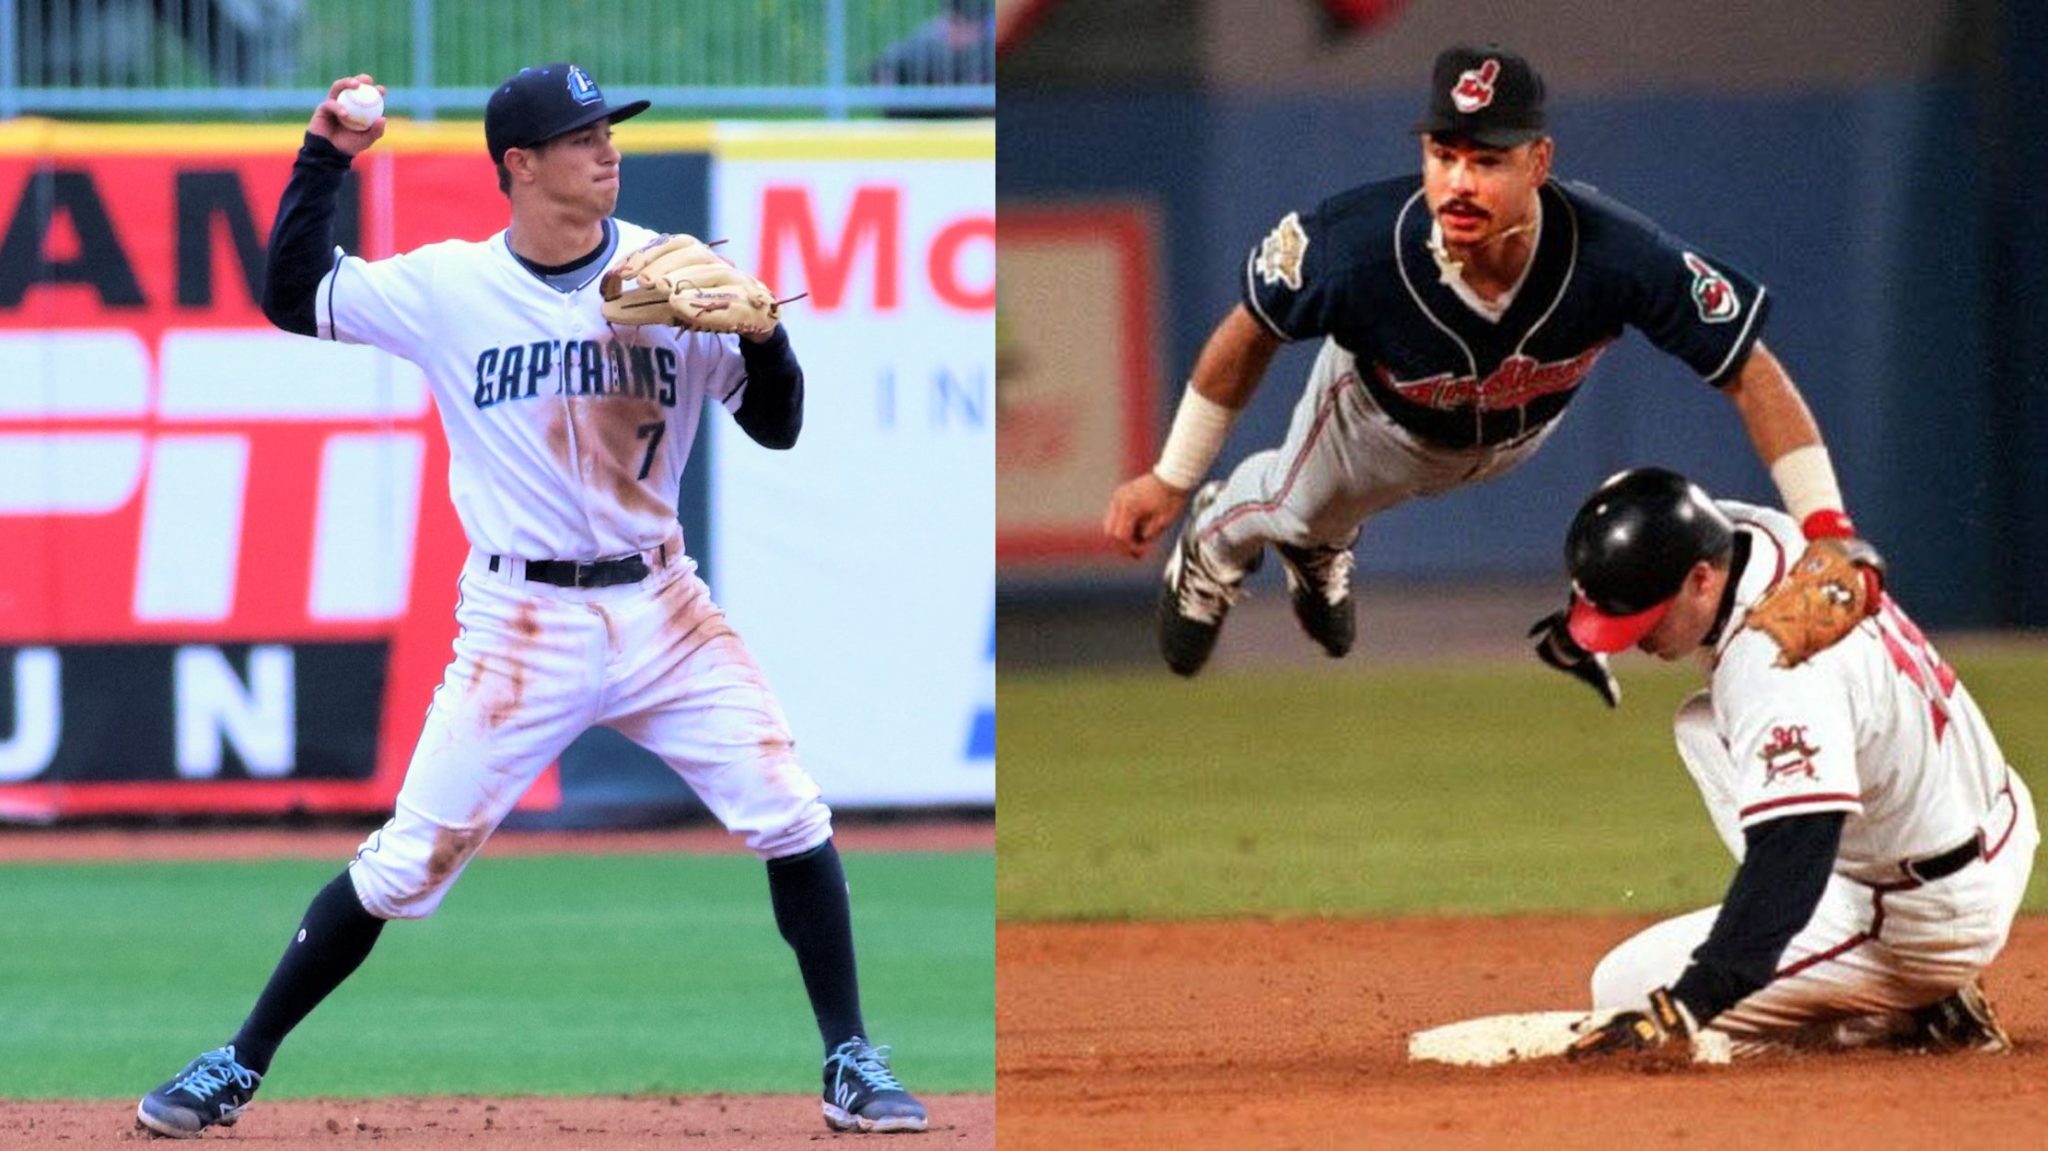 Reliving the Past: Comparing the 1995 Cleveland Indians to Today's Prospects